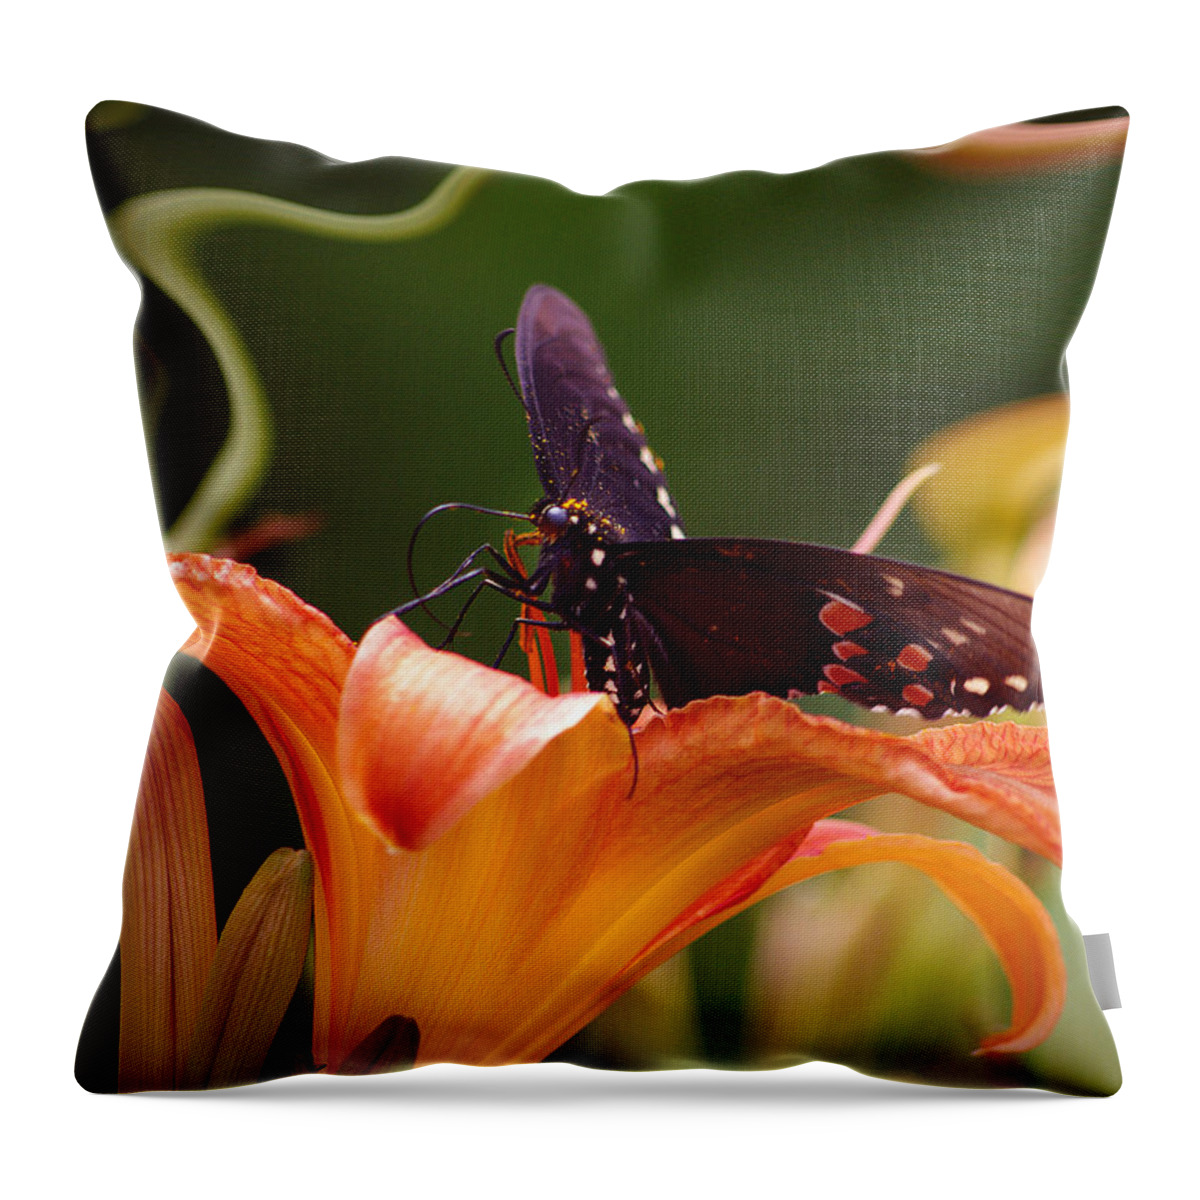 Nspirational Throw Pillow featuring the photograph Butterflies Are Free... by Arthur Miller